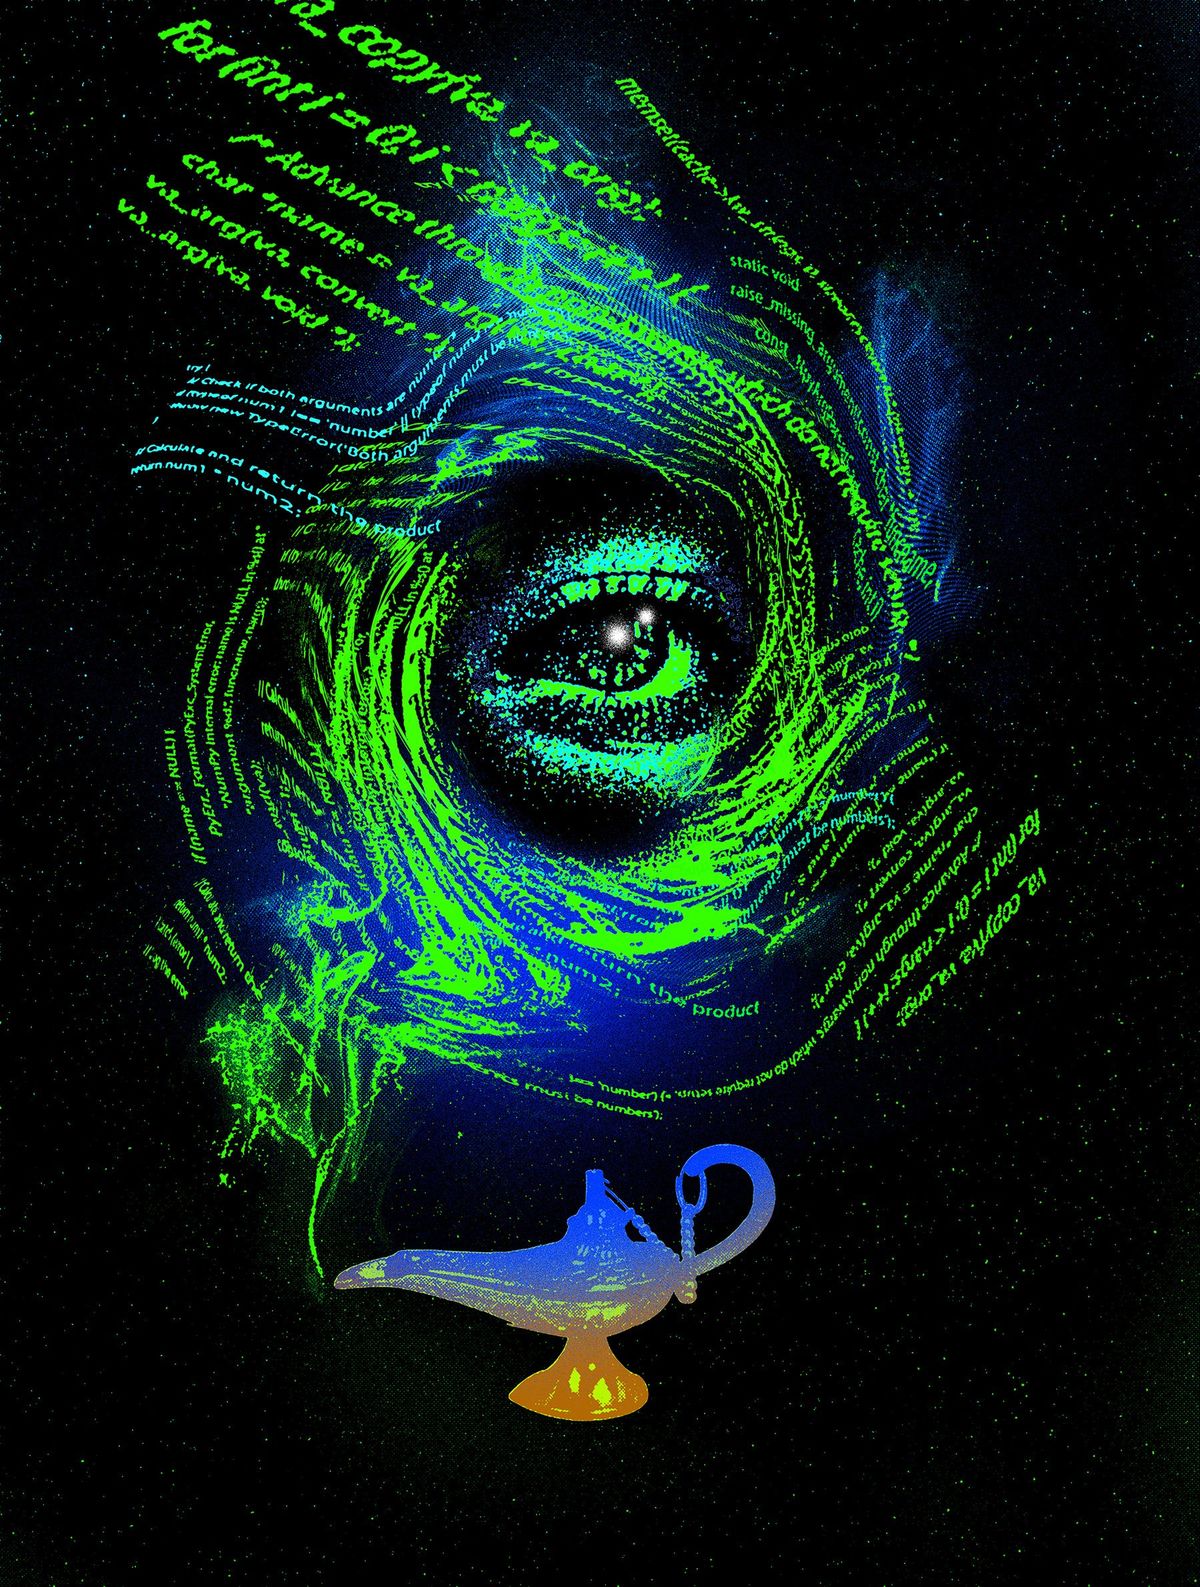 An illustration of an eye surrounded by code with a genie's lamp below it.  